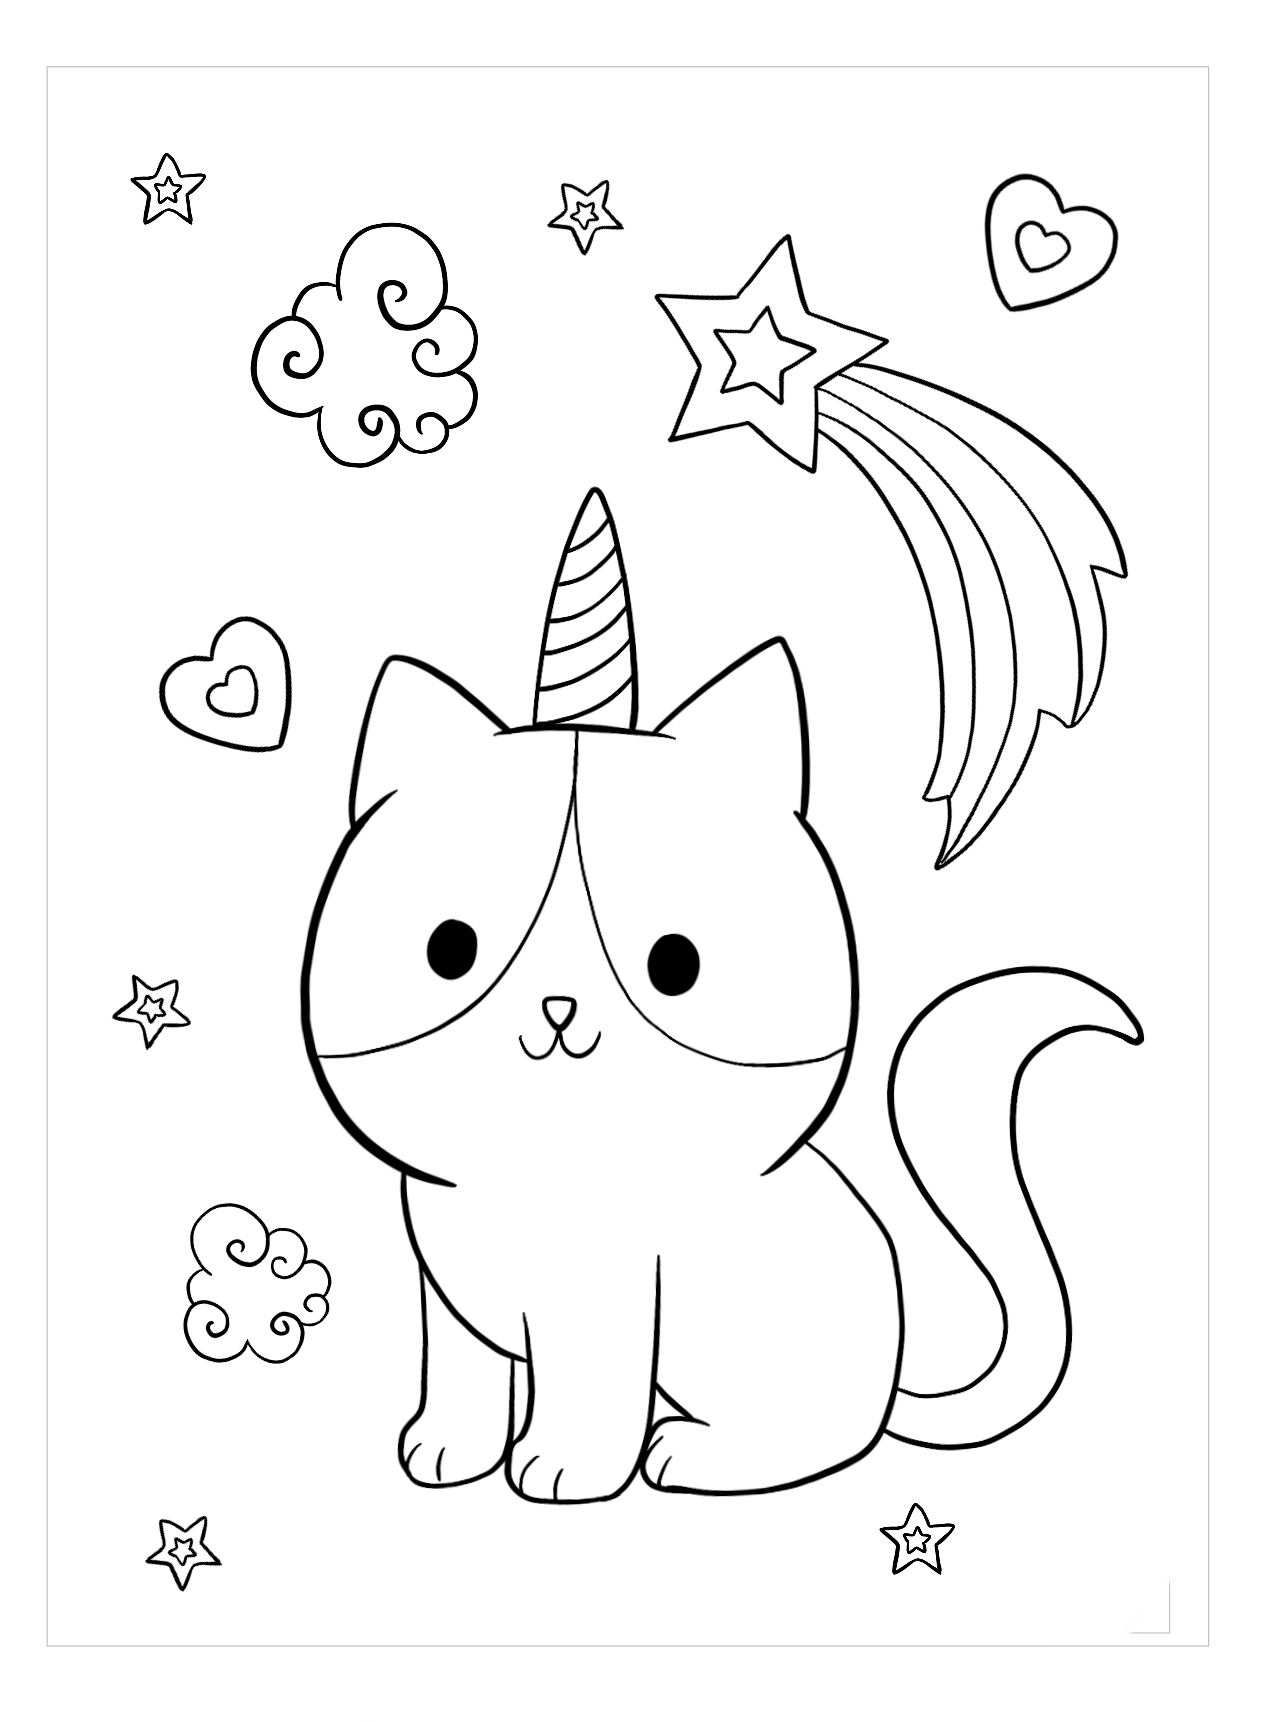 Caticorn with comet from Unicorn Cat